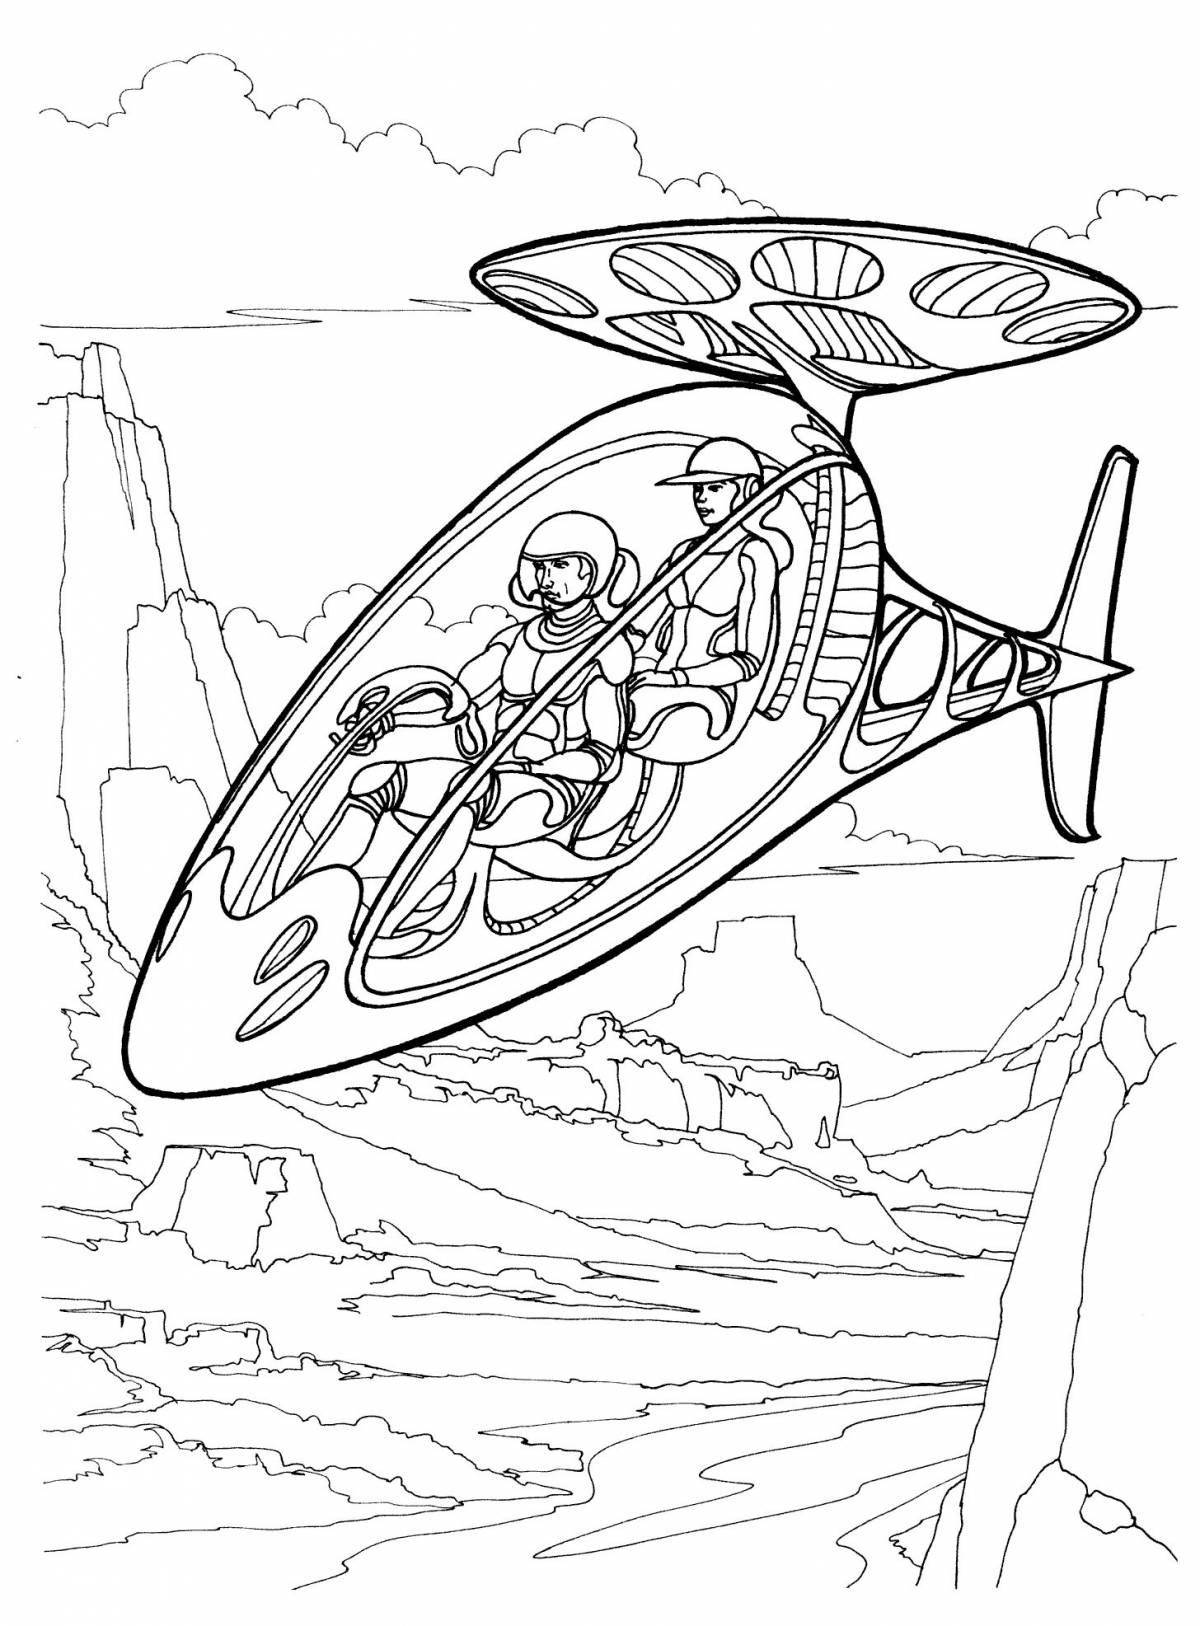 Loving Future Coloring Page